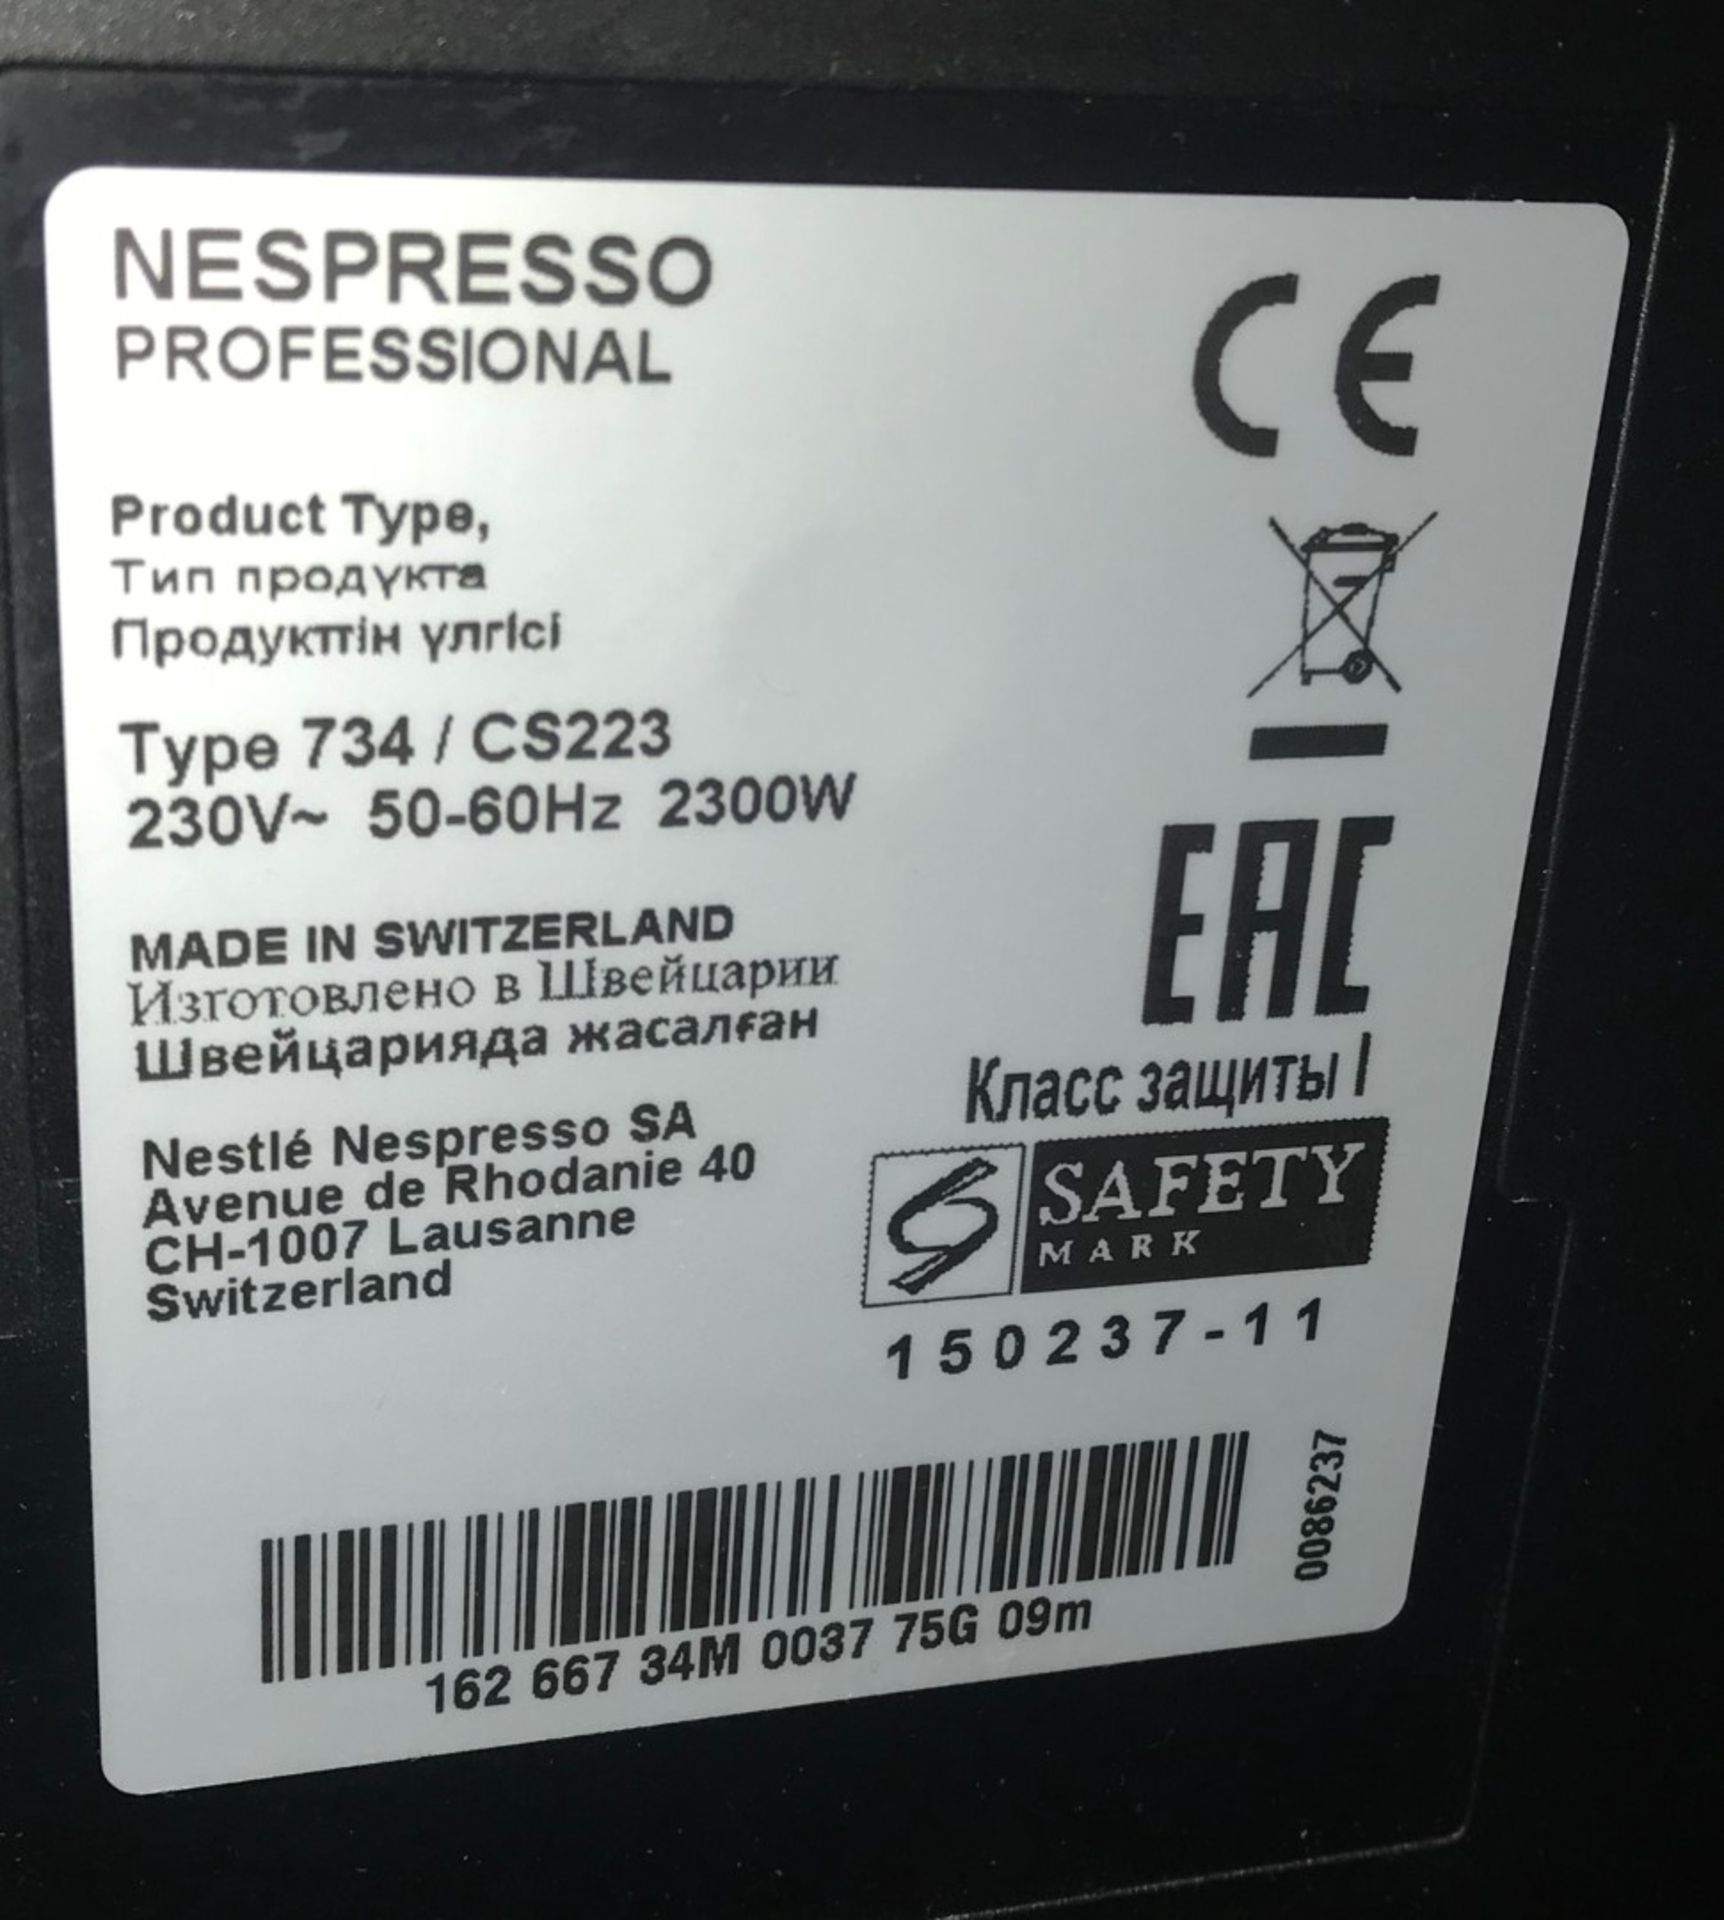 1 x Nespresso Gemini CS220 Pro Coffee Machine With Pod Holder and Pods - RRP £2,300 - Ref: RB275 - - Image 4 of 5